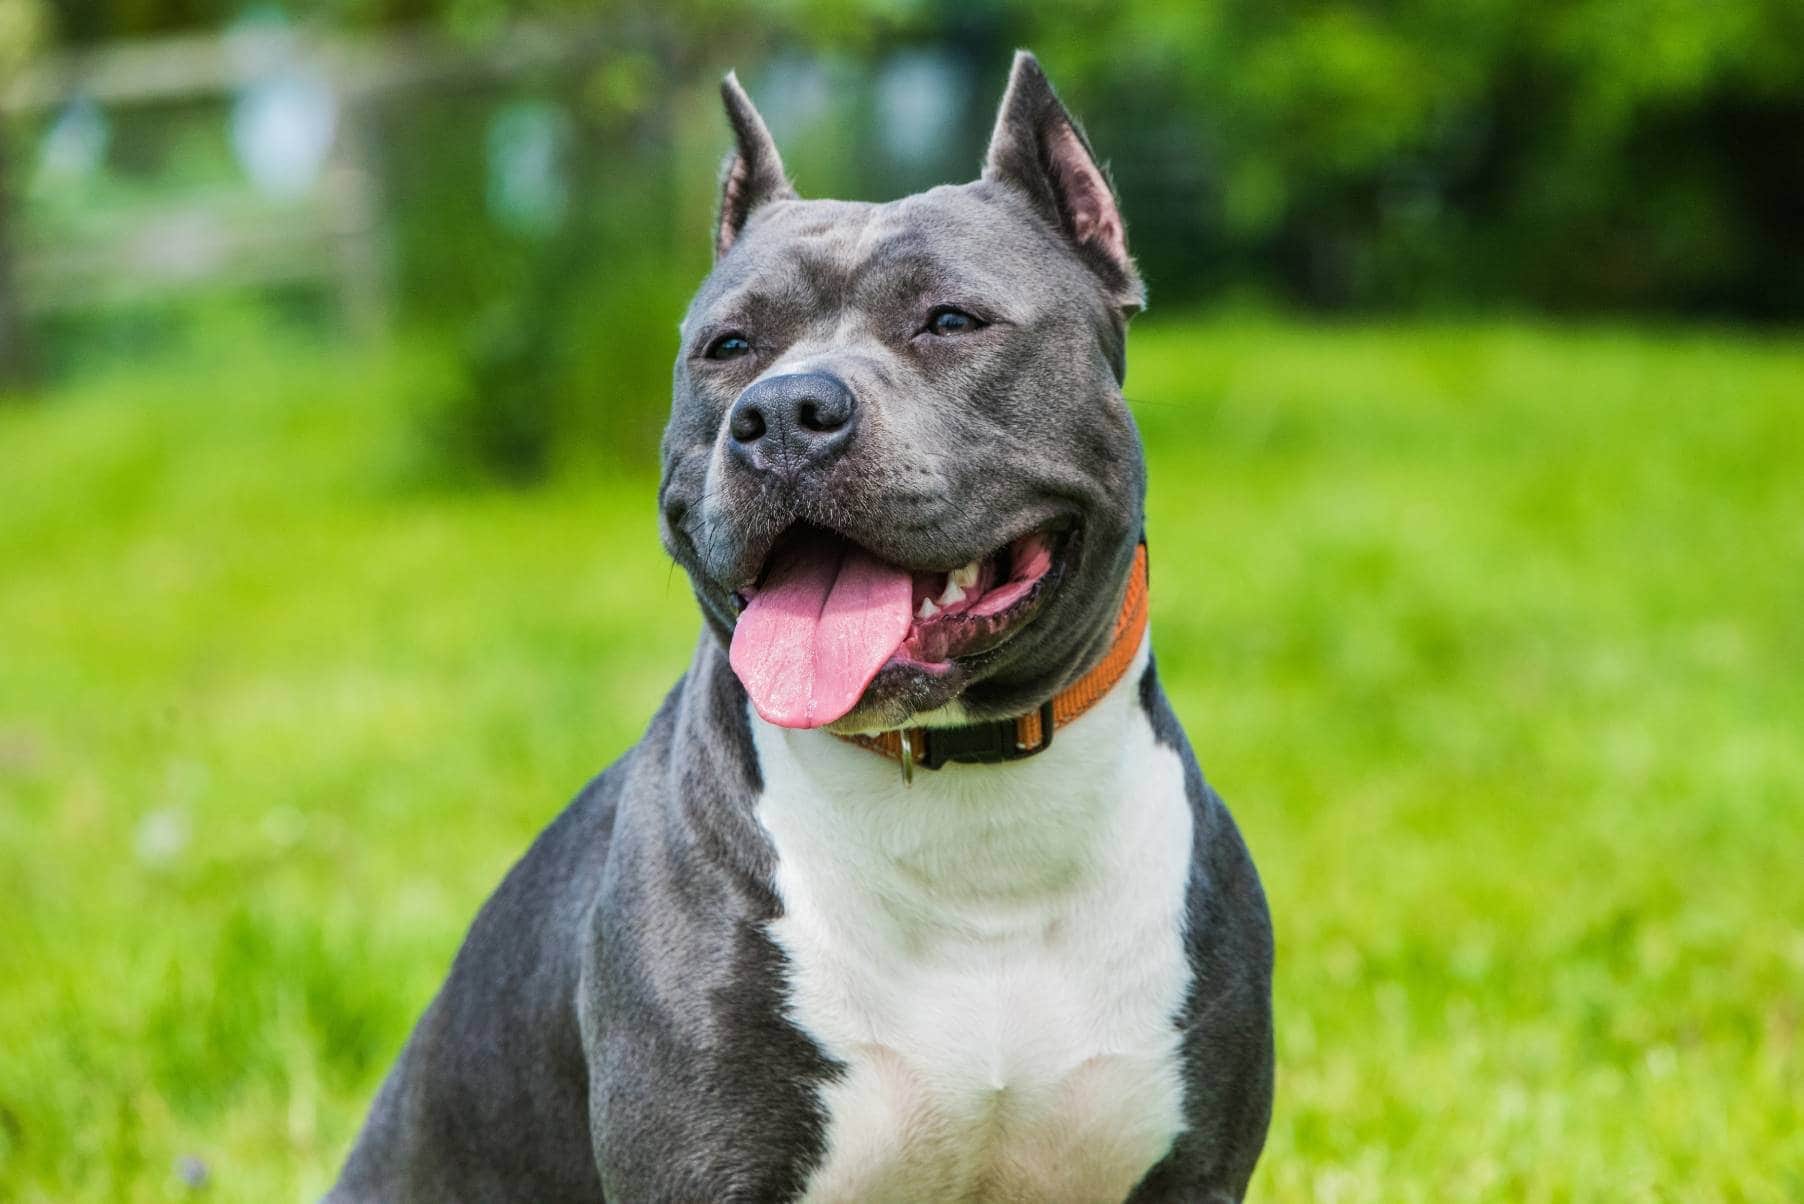 Should Pit Bulls Be Banned? Top 3 Pros and Cons